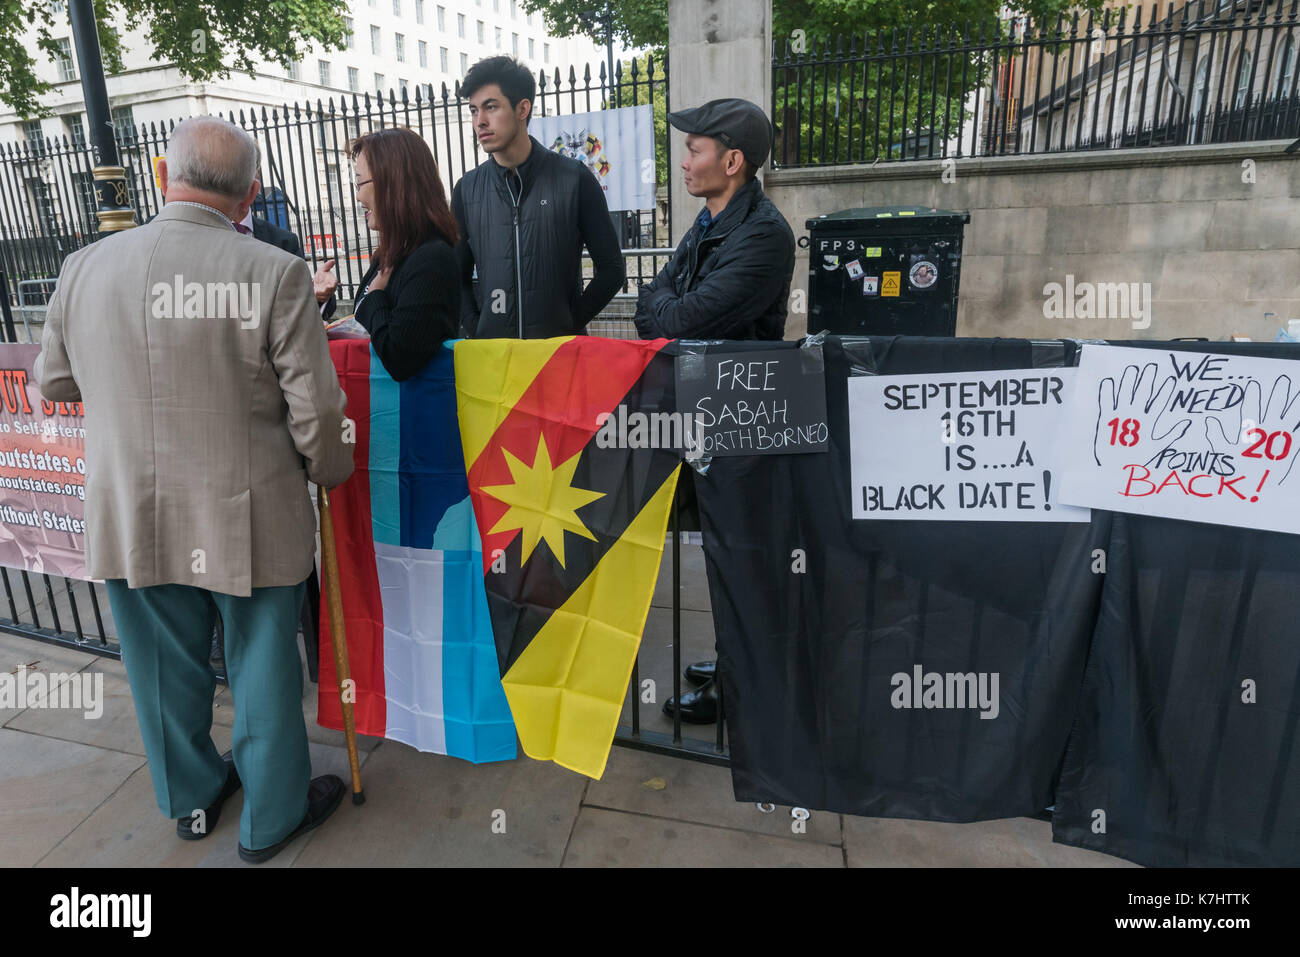 London, UK. 16th September 2017. Sabahans and Sarawkians protest at Downing St on  Malaysia Day, which they say is a 'Black Day for Sabah and Sarawak', calling for a restoration of human rights and the repeal of the Sedition Act and and freedom for Sarawak and Sabah. On 16th September 1963 the two independent countries in North Borneo joined with the Federation of Malaya and Singapore to form Malaysia, with promises, assurances and undertakings for their future in the federation, including the '20 points' of an Inter-Governmental Committee (IGC) Report, which they say have been cast aside, wit Stock Photo